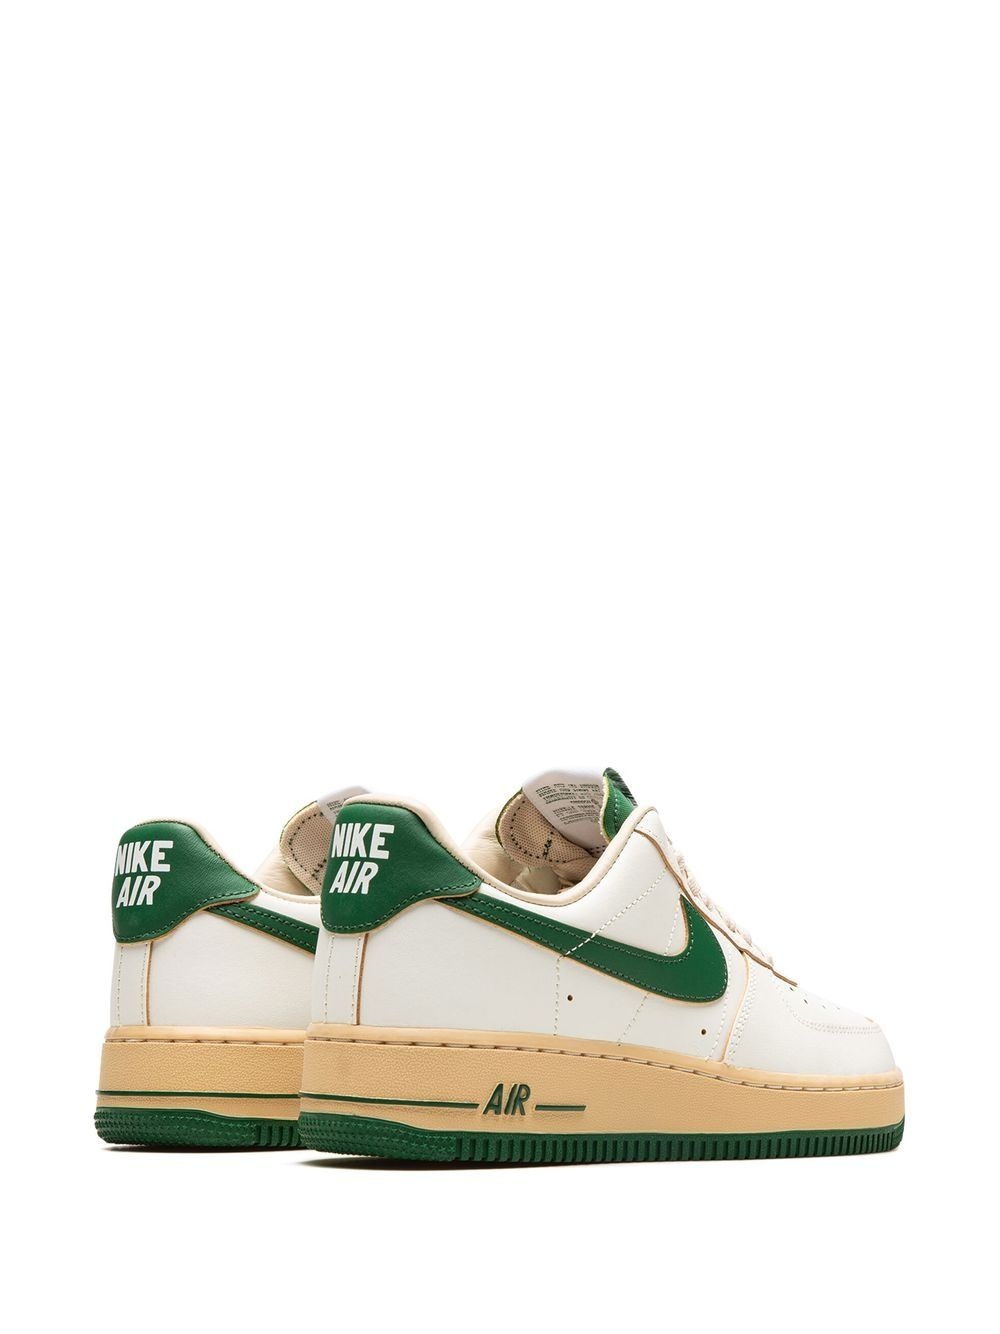 Air Force 1 Low "Gorge Green" sneakers - 3